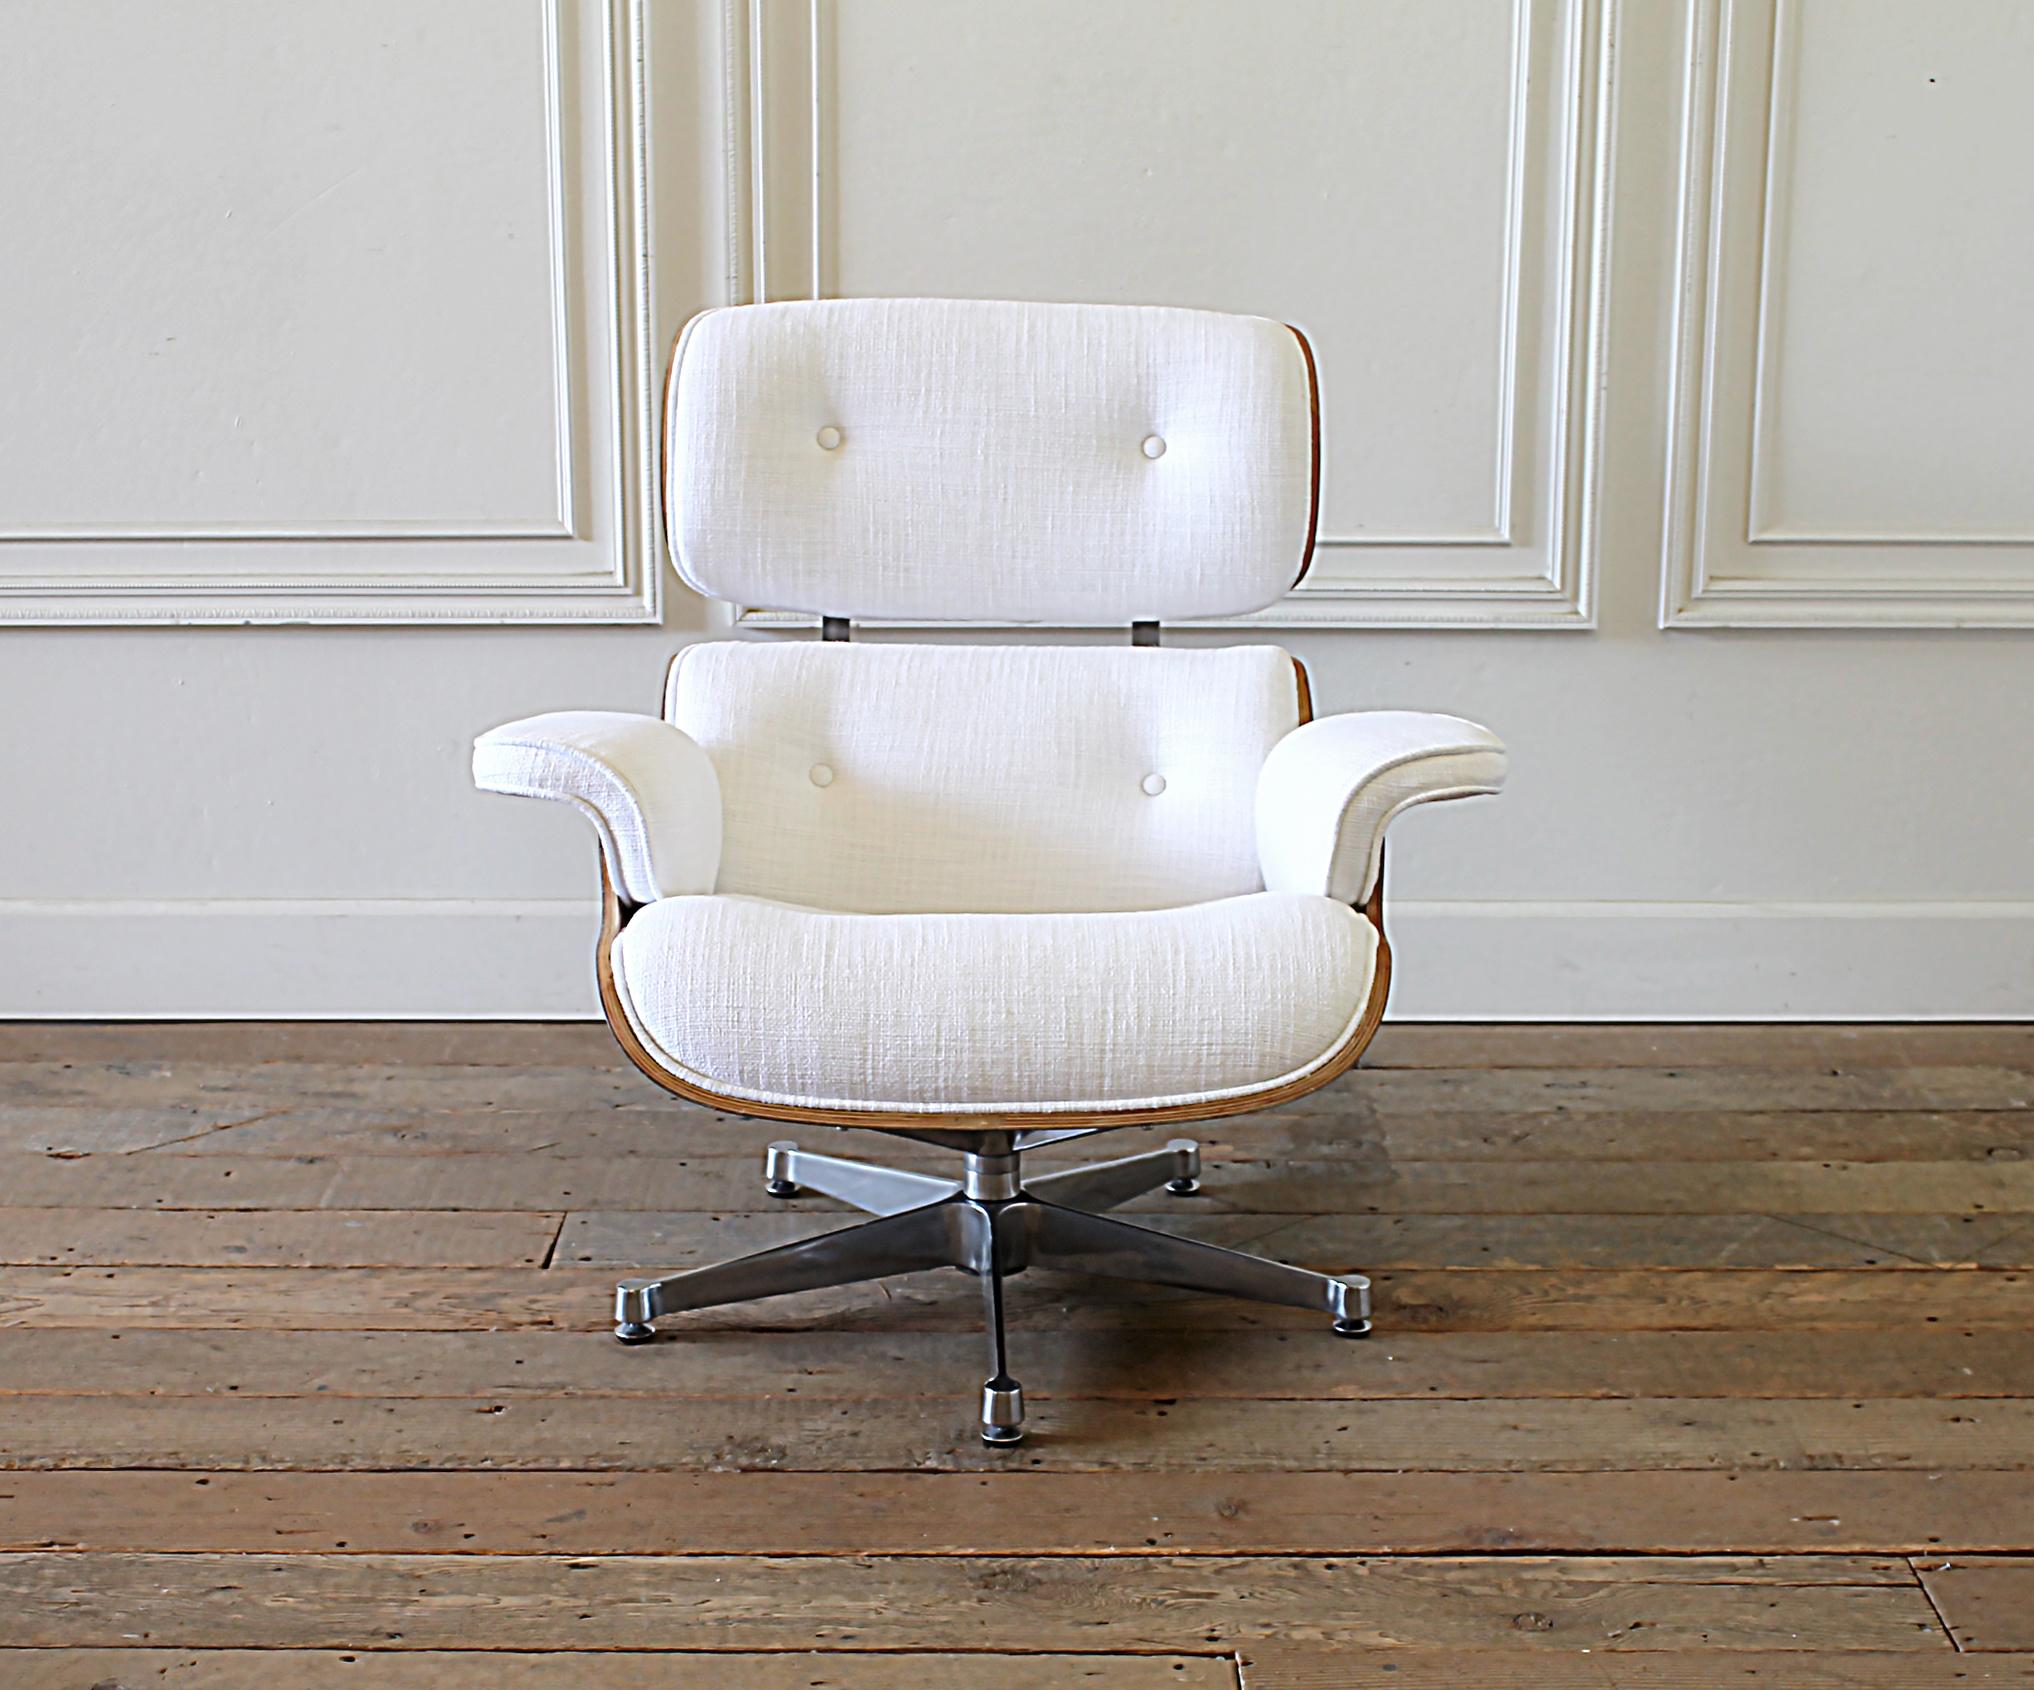 Eames style chair and ottoman in coated white linen blend upholstery.
Brand new upholstery, with light wood, and stainless base.
Subtle scuffs are present on the wood and base.
White thick nubby textured linen with coat to protect from everyday